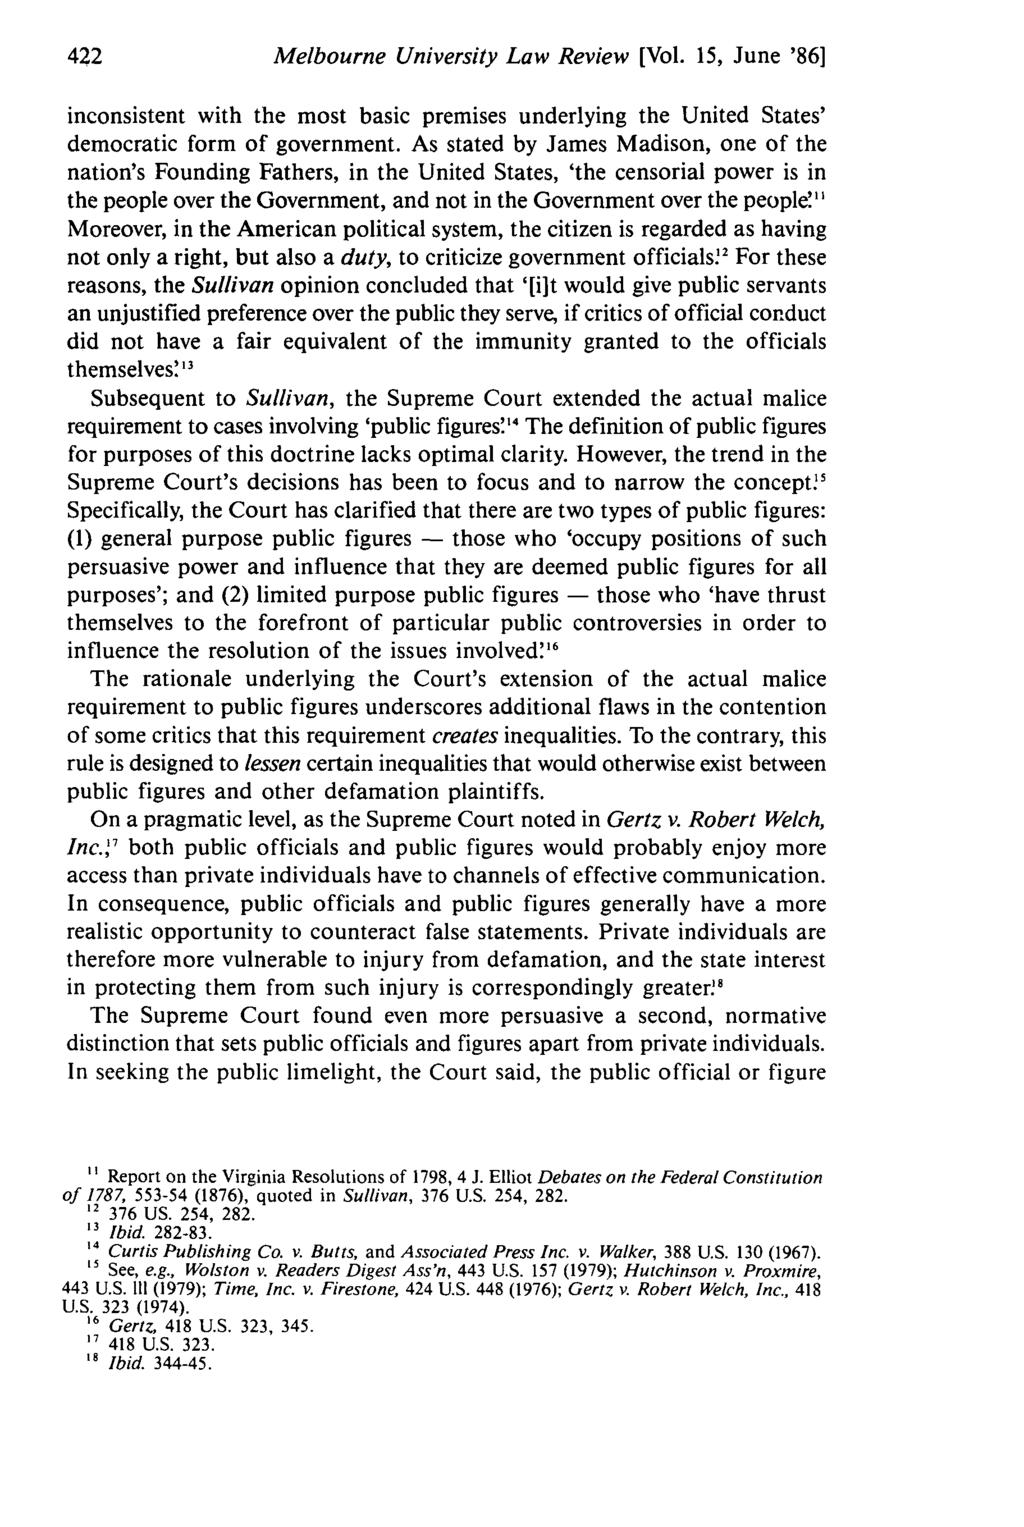 Melbourne University Law Review [Vol. 15, June '86] inconsistent with the most basic premises underlying the United States' democratic form of government.